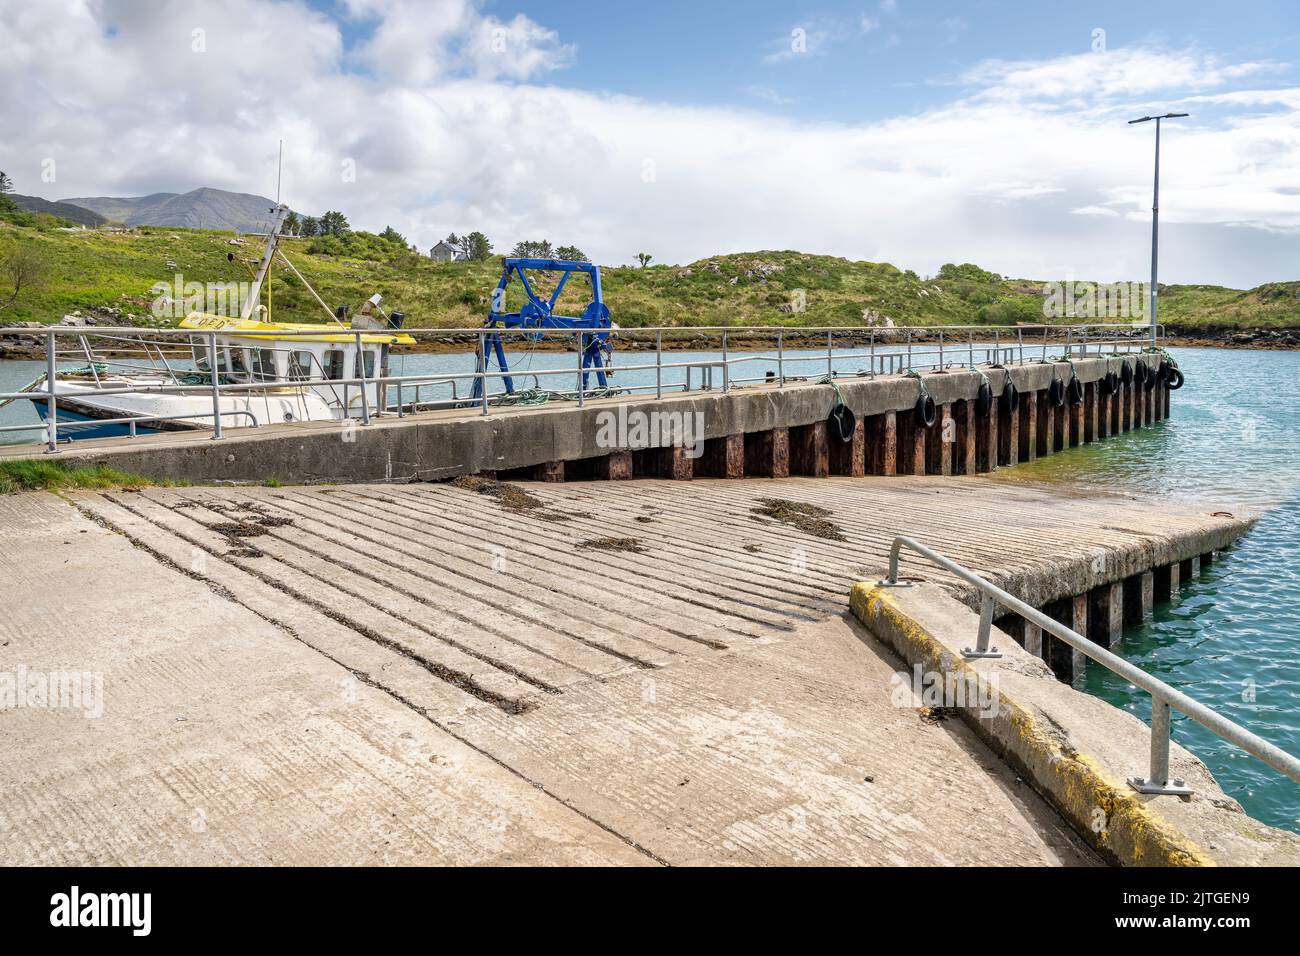 The Pontoon and pier on the Glengarriff road near Castletownbere, County Cork, Ireland Stock Photo